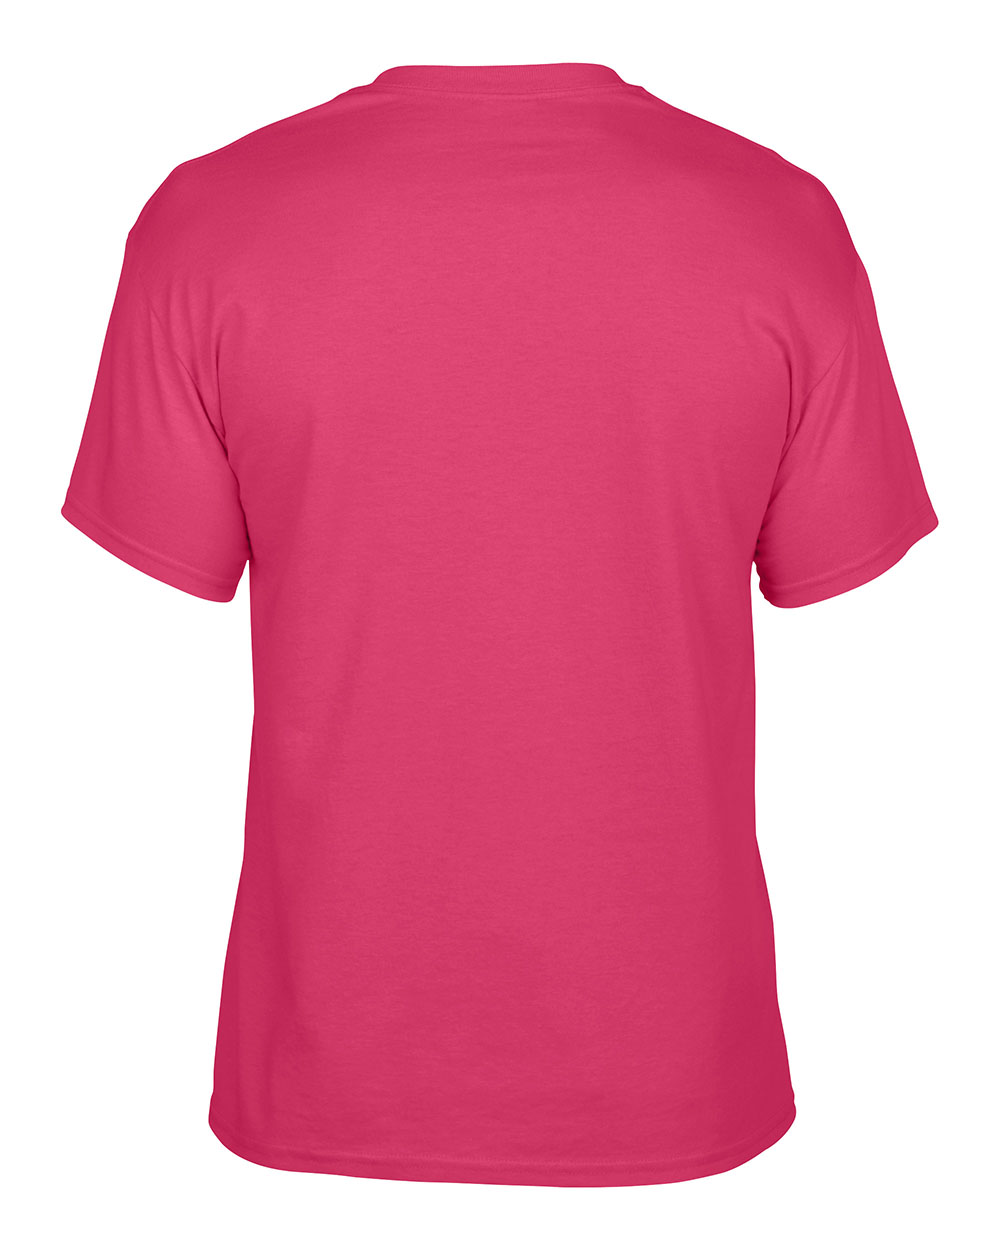 bright pink tee,Save up to 19%,www.syncro-system.bg